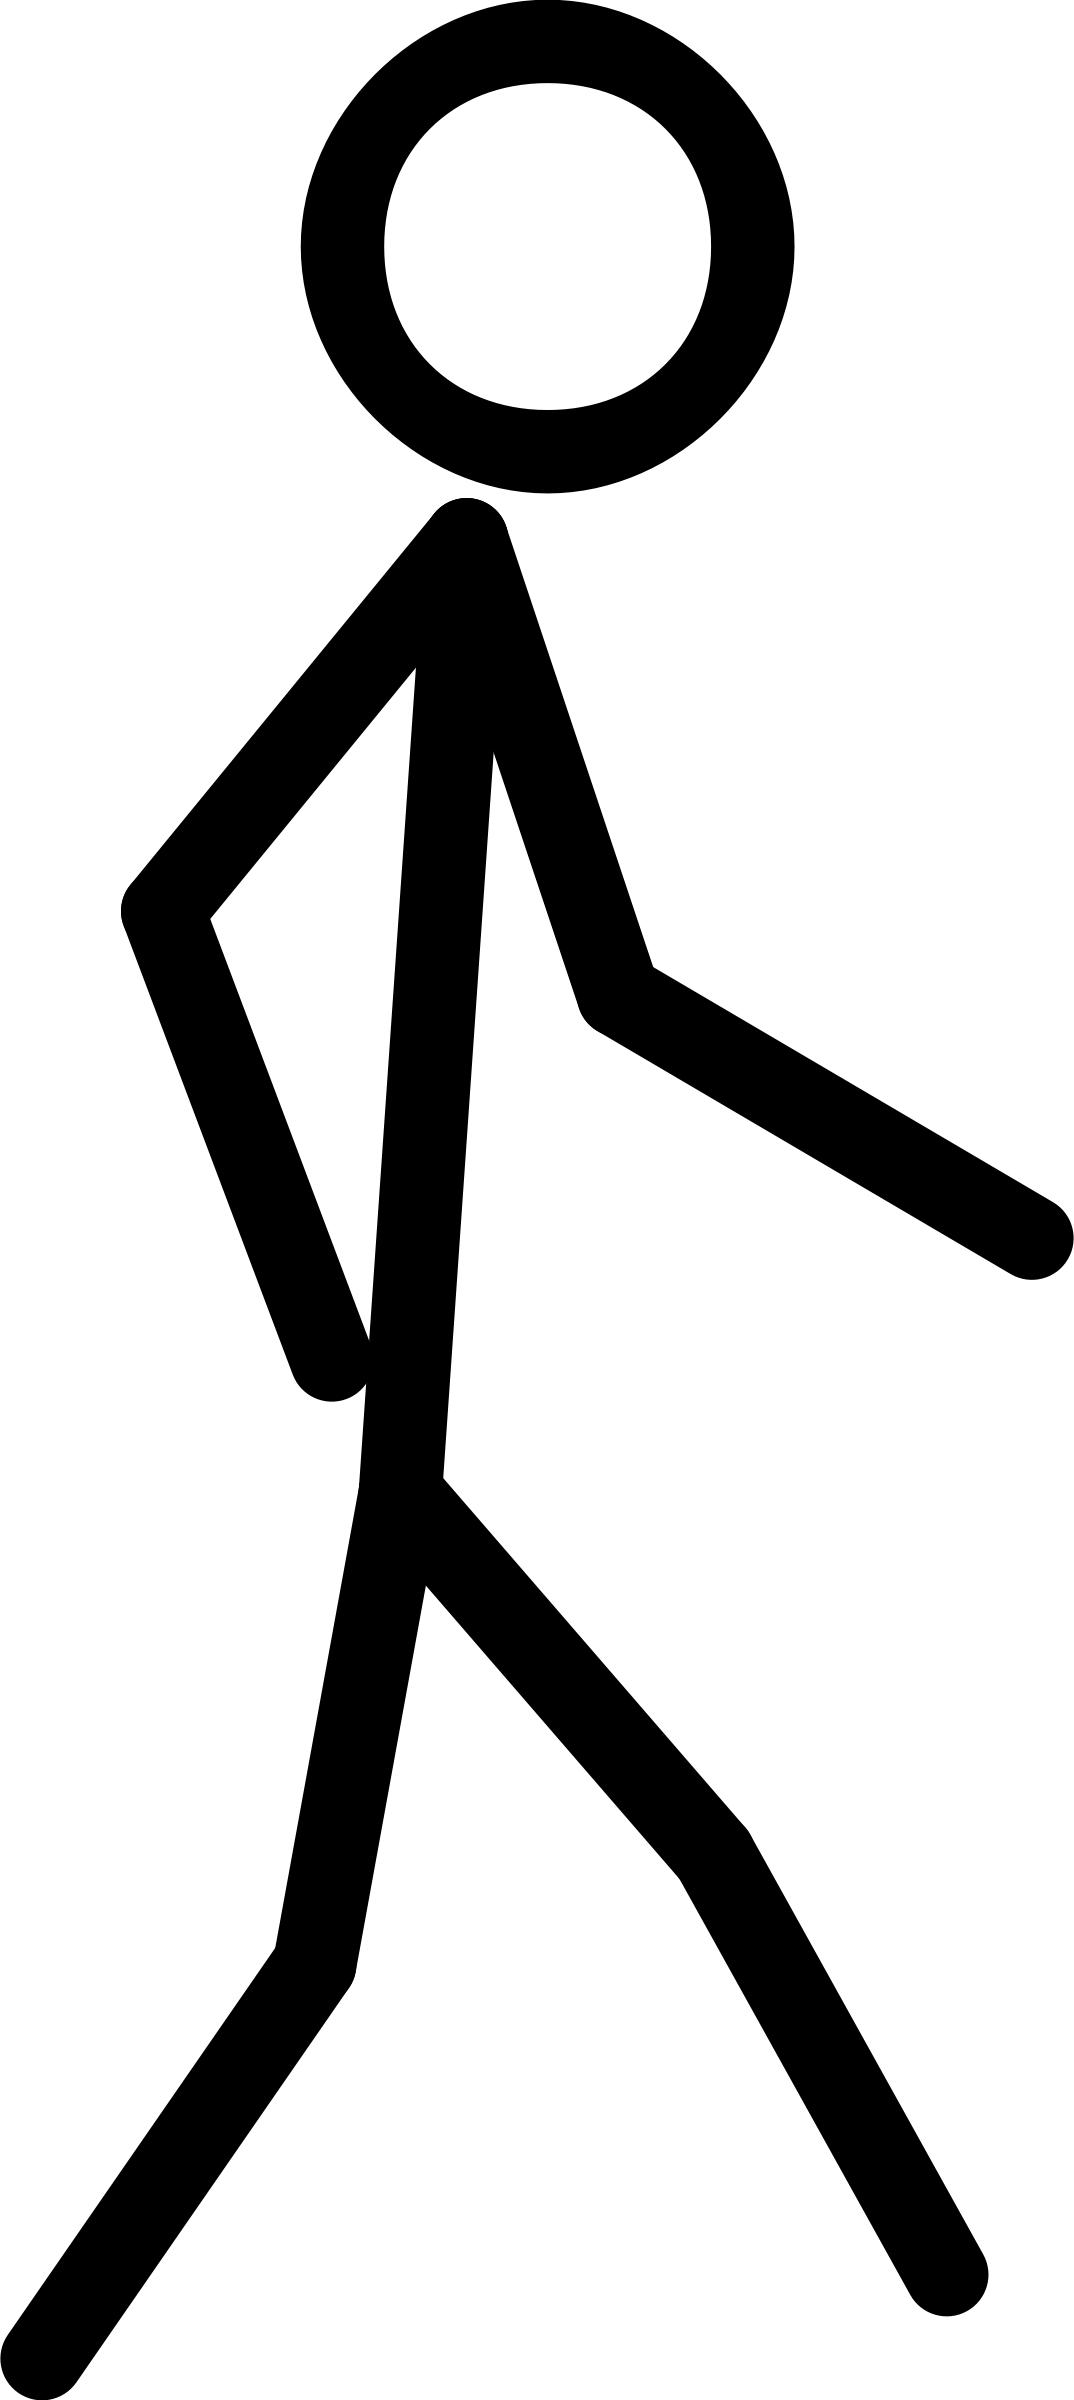 Stick figure walking Icons PNG - Free PNG and Icons Downloads